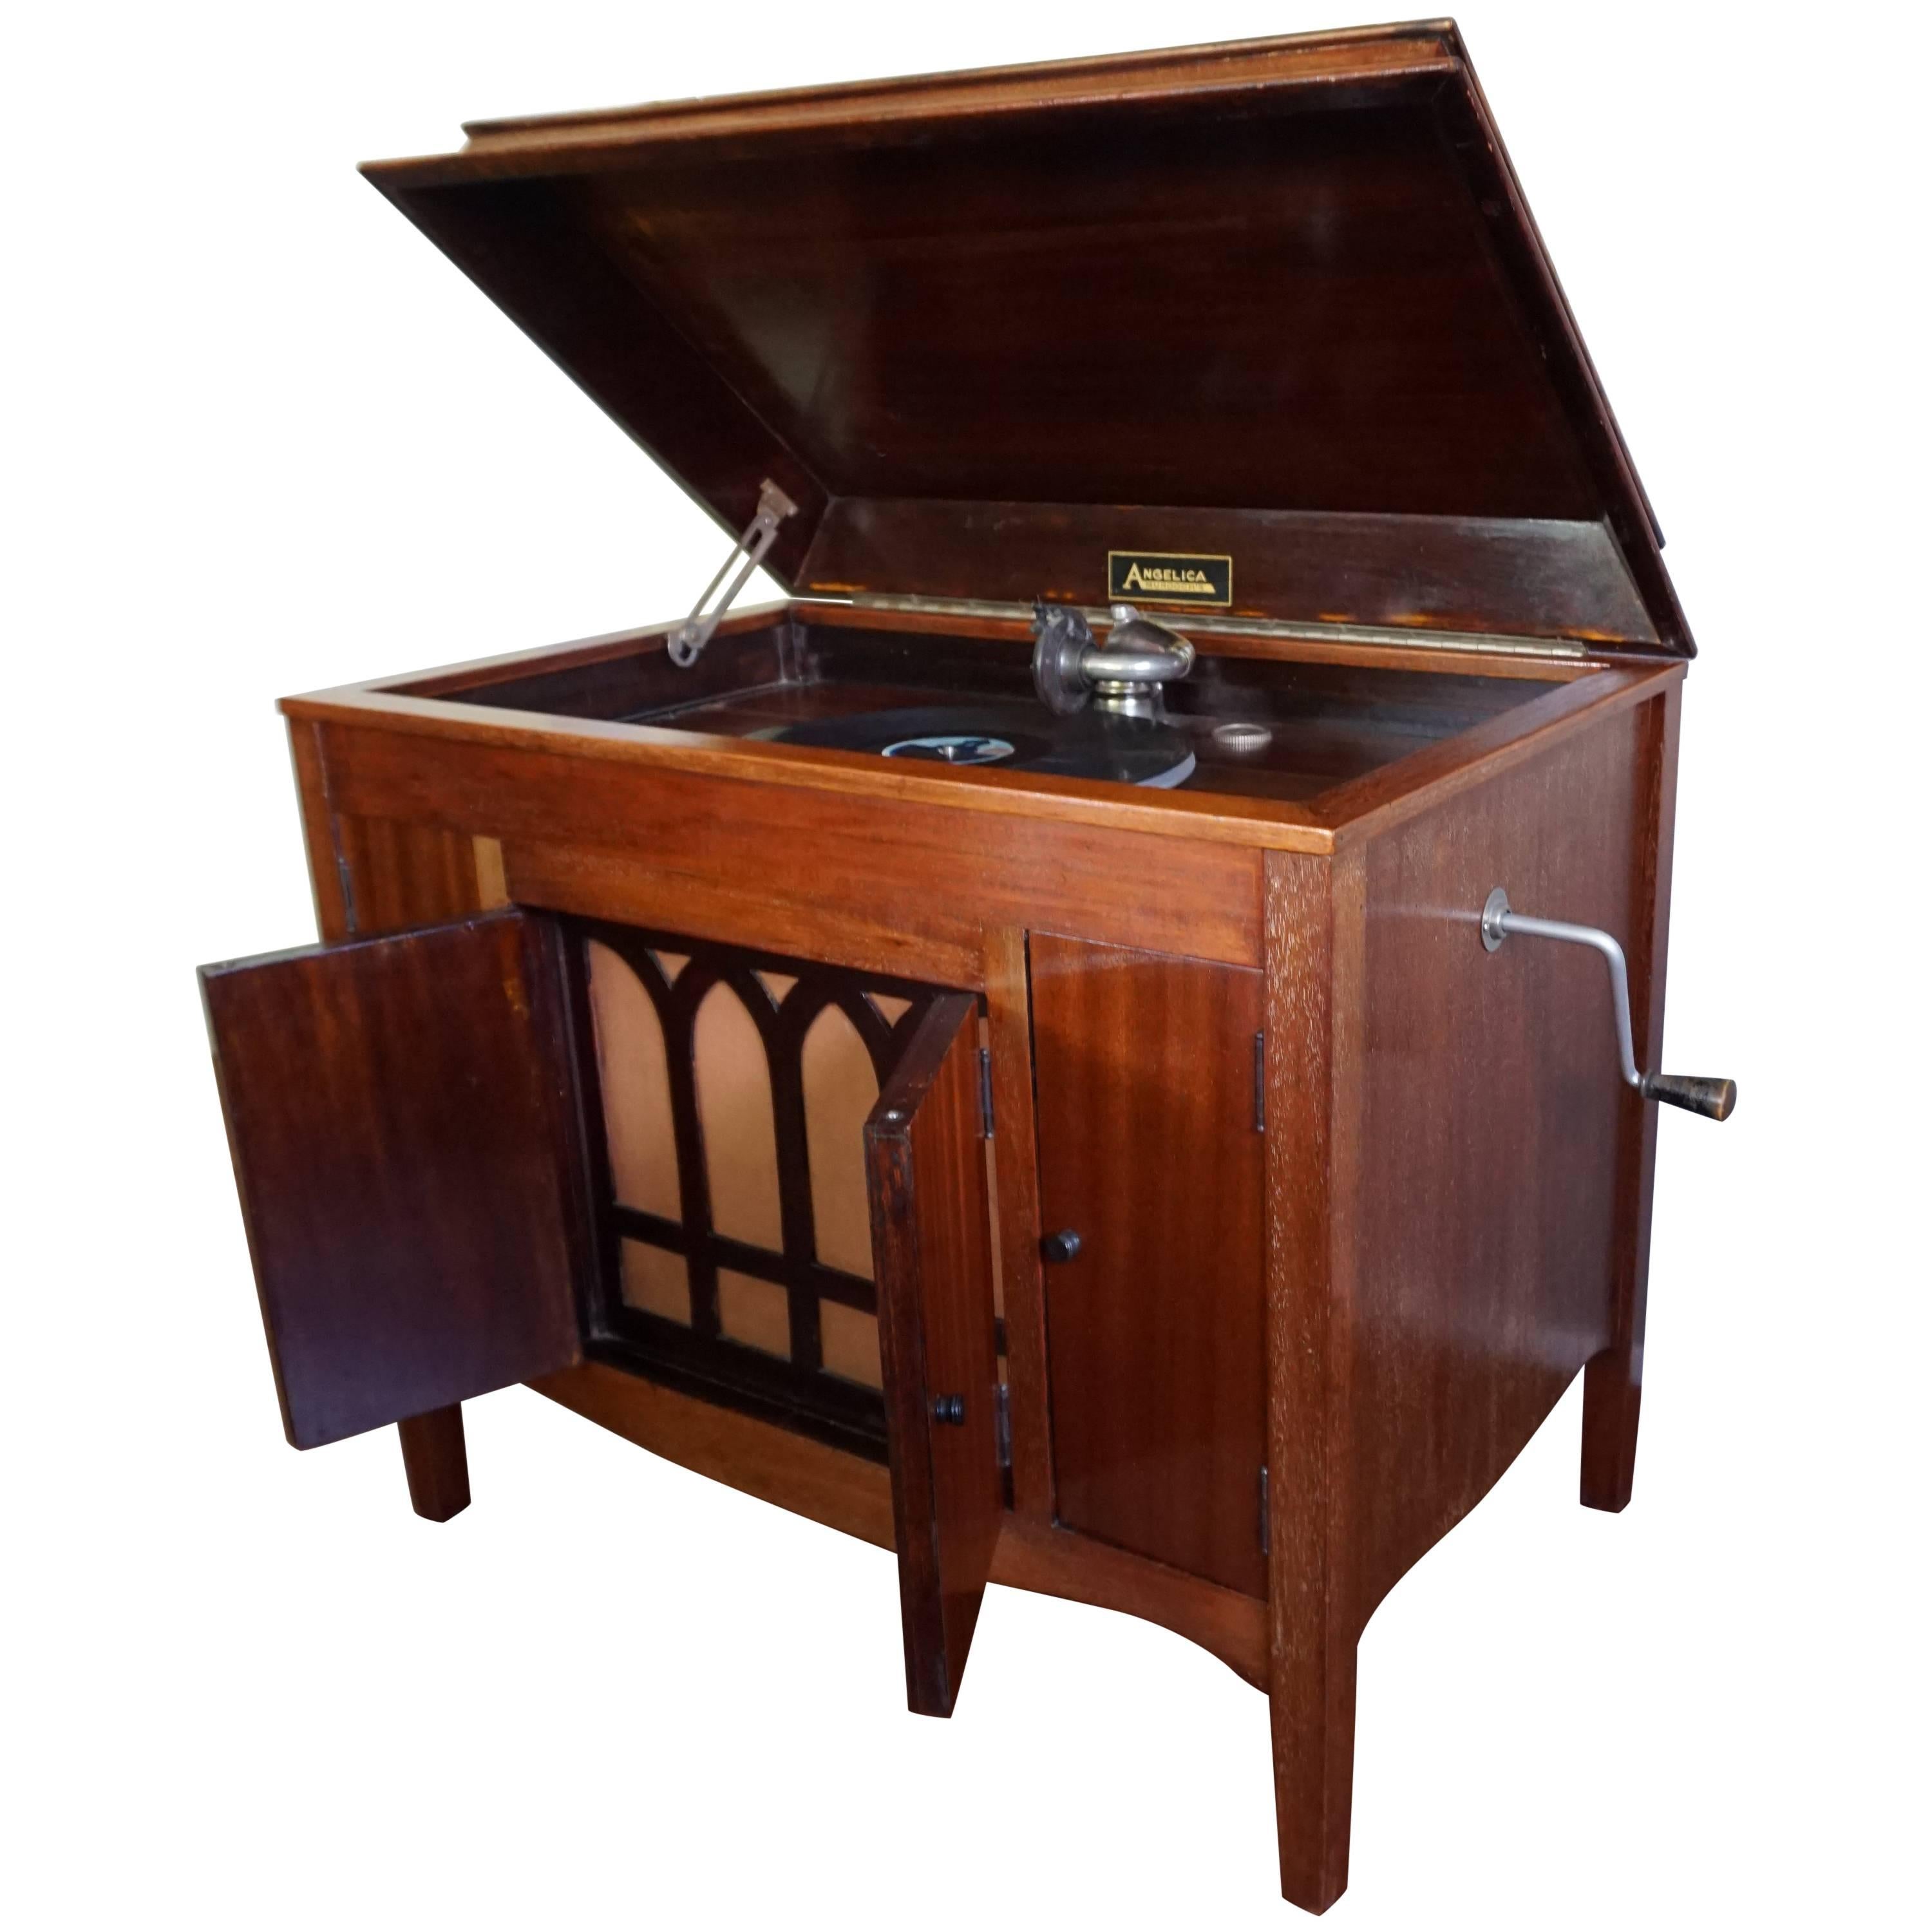 Early 20th Century Handcrafted Mahogany Art Deco Gramophone/Record Player